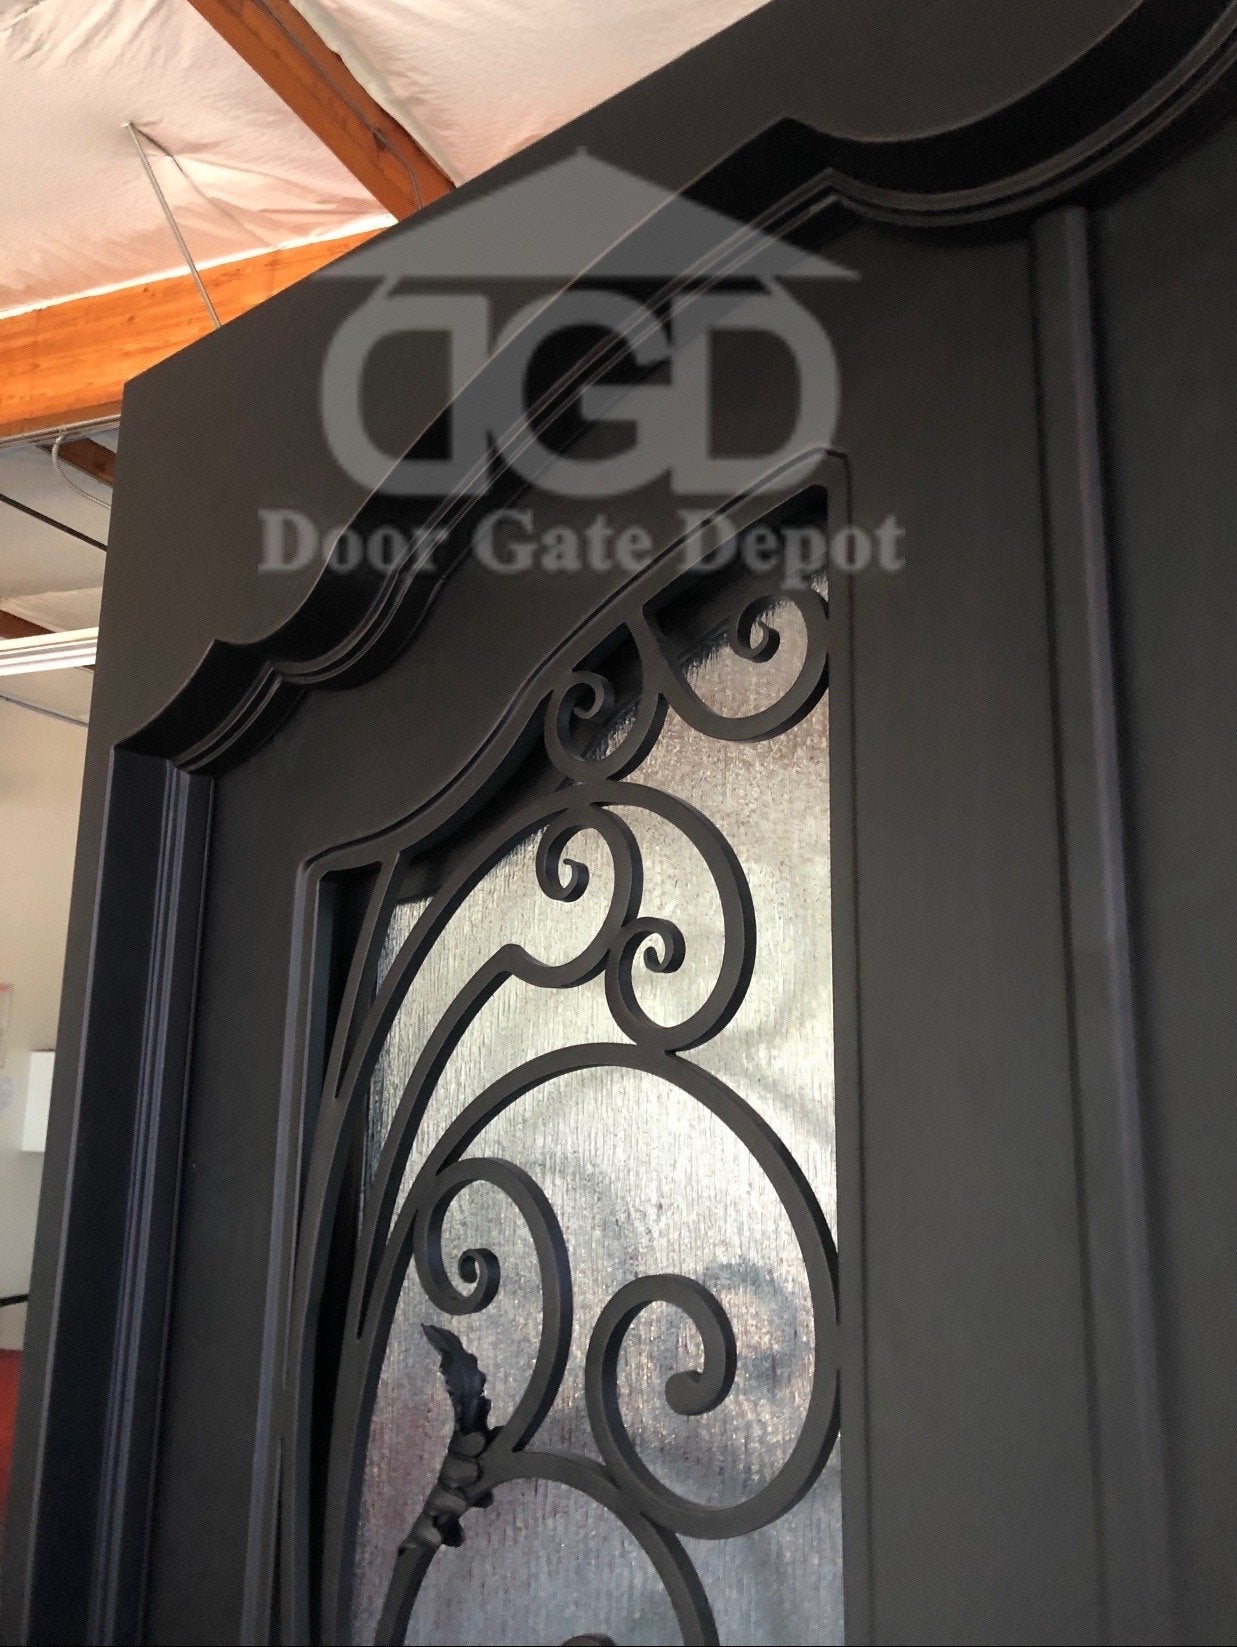 PEACOCK- Flat top arch inside, pre-hung, removable bug screens, wrought iron doors, 62x96- Right Hand - Door Gate Depot